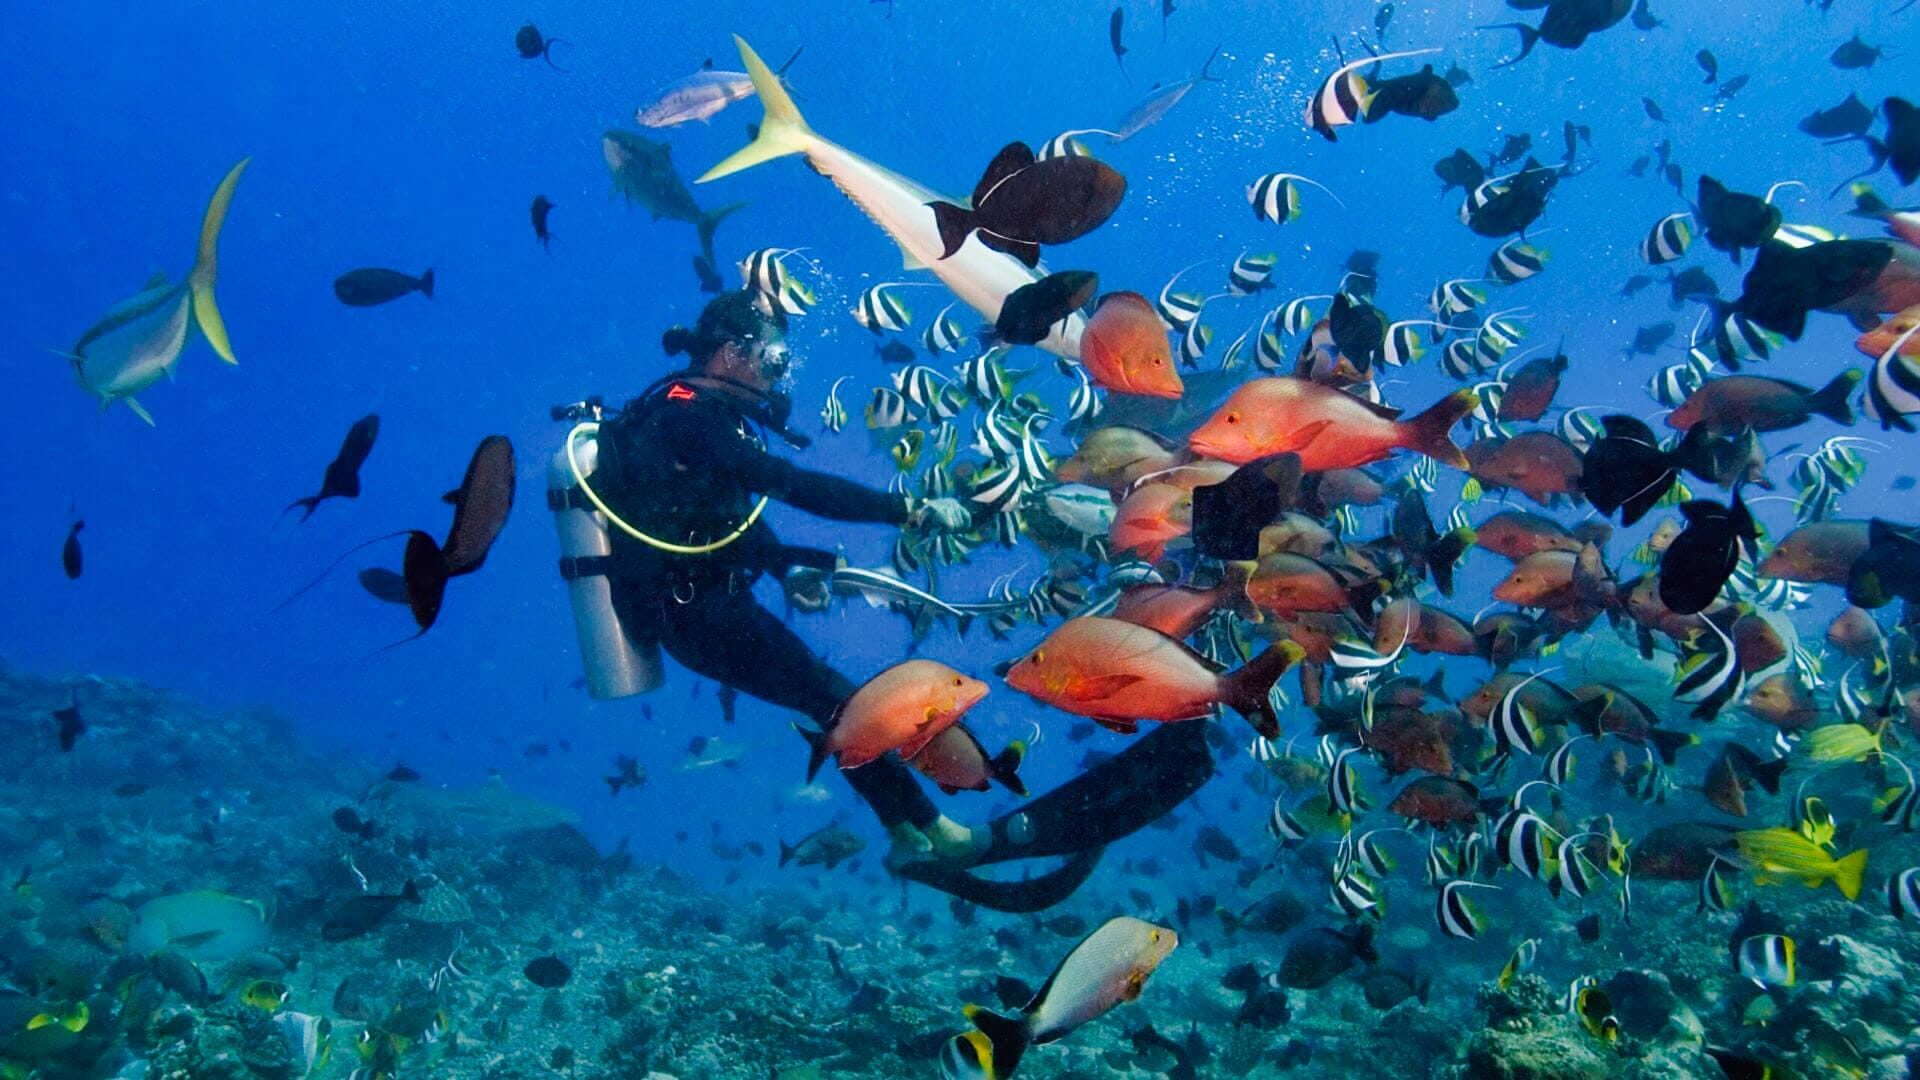 SCUBA DIVER DISCOVERING ONE OF THE BEST DIVE SITES AT NUSA LEMBONGAN AND NUSA PENIDA, BALI